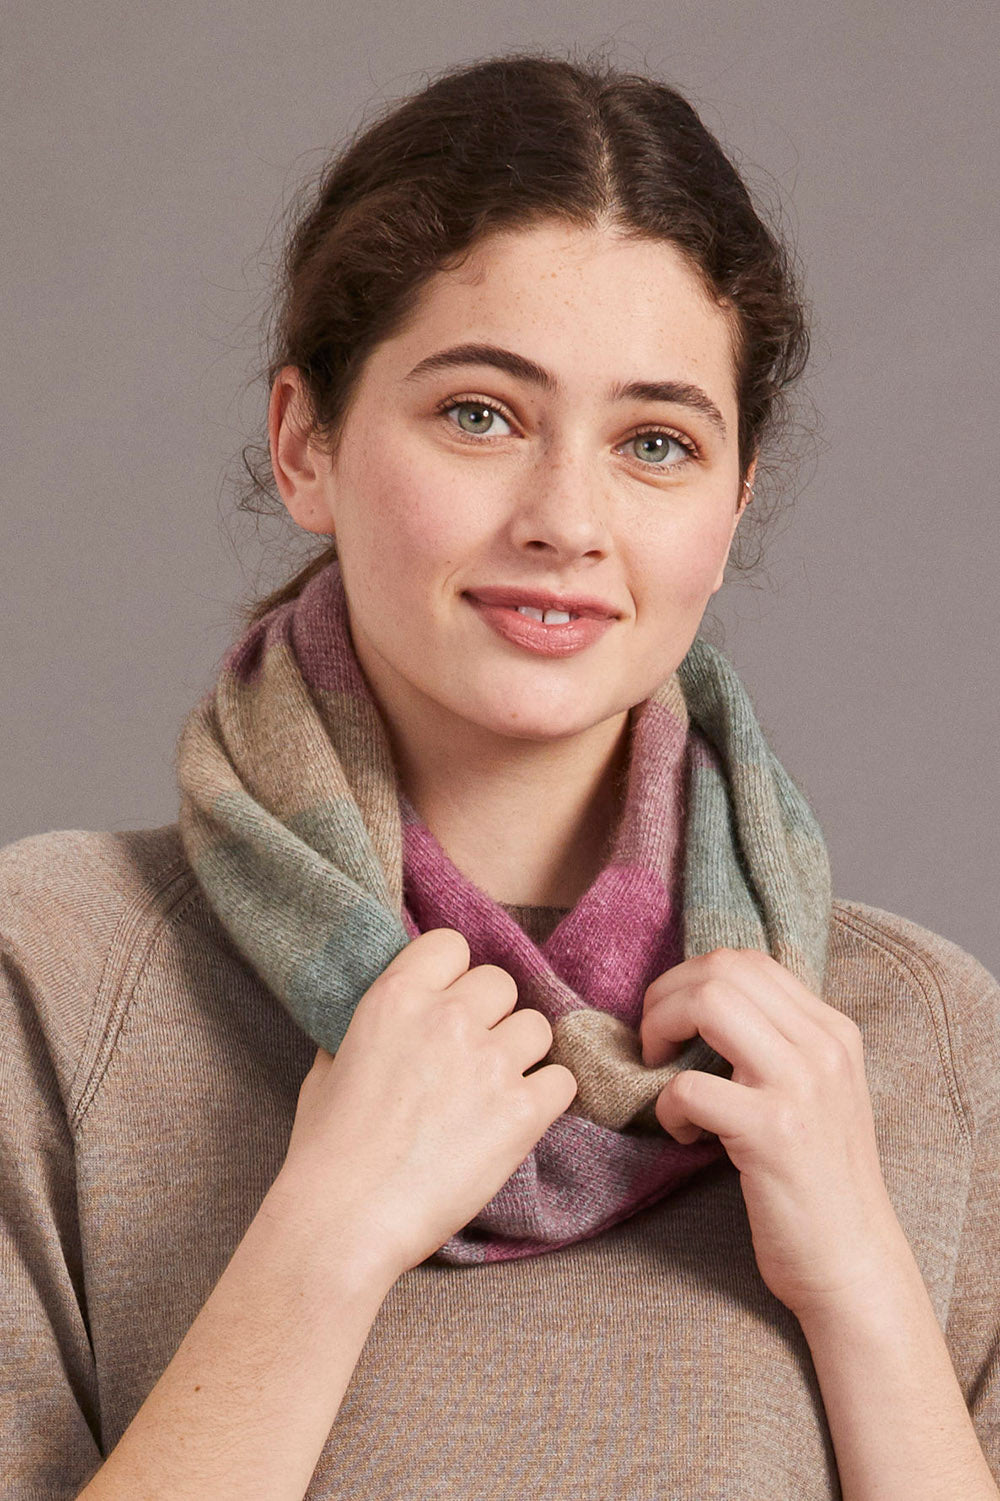 Ombre Snood